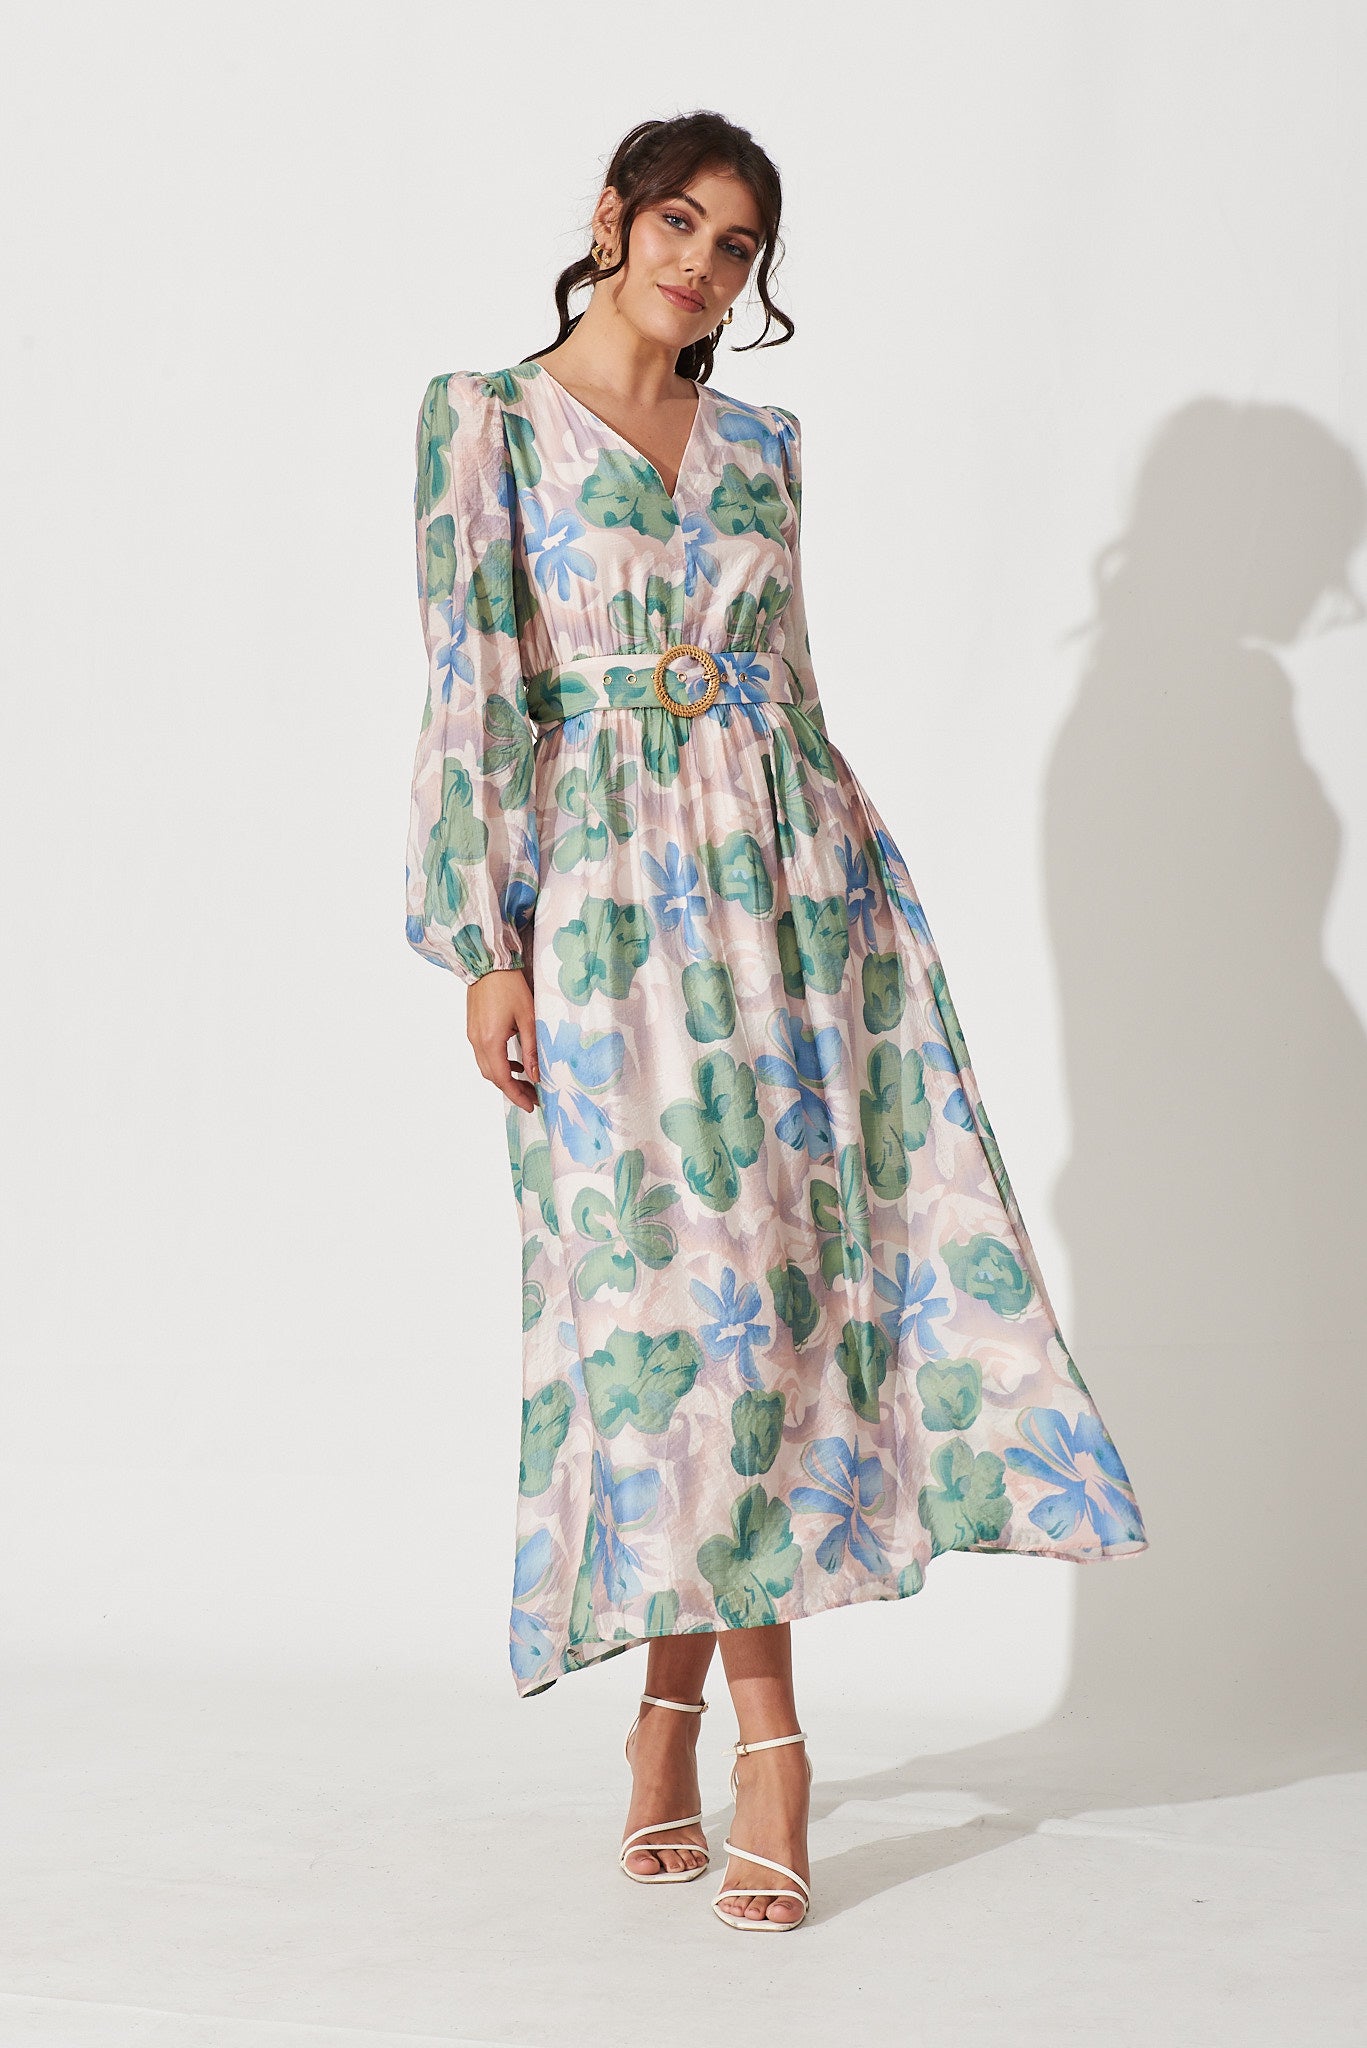 Adrini Maxi Dress In Blush With Green Floral Print - full length